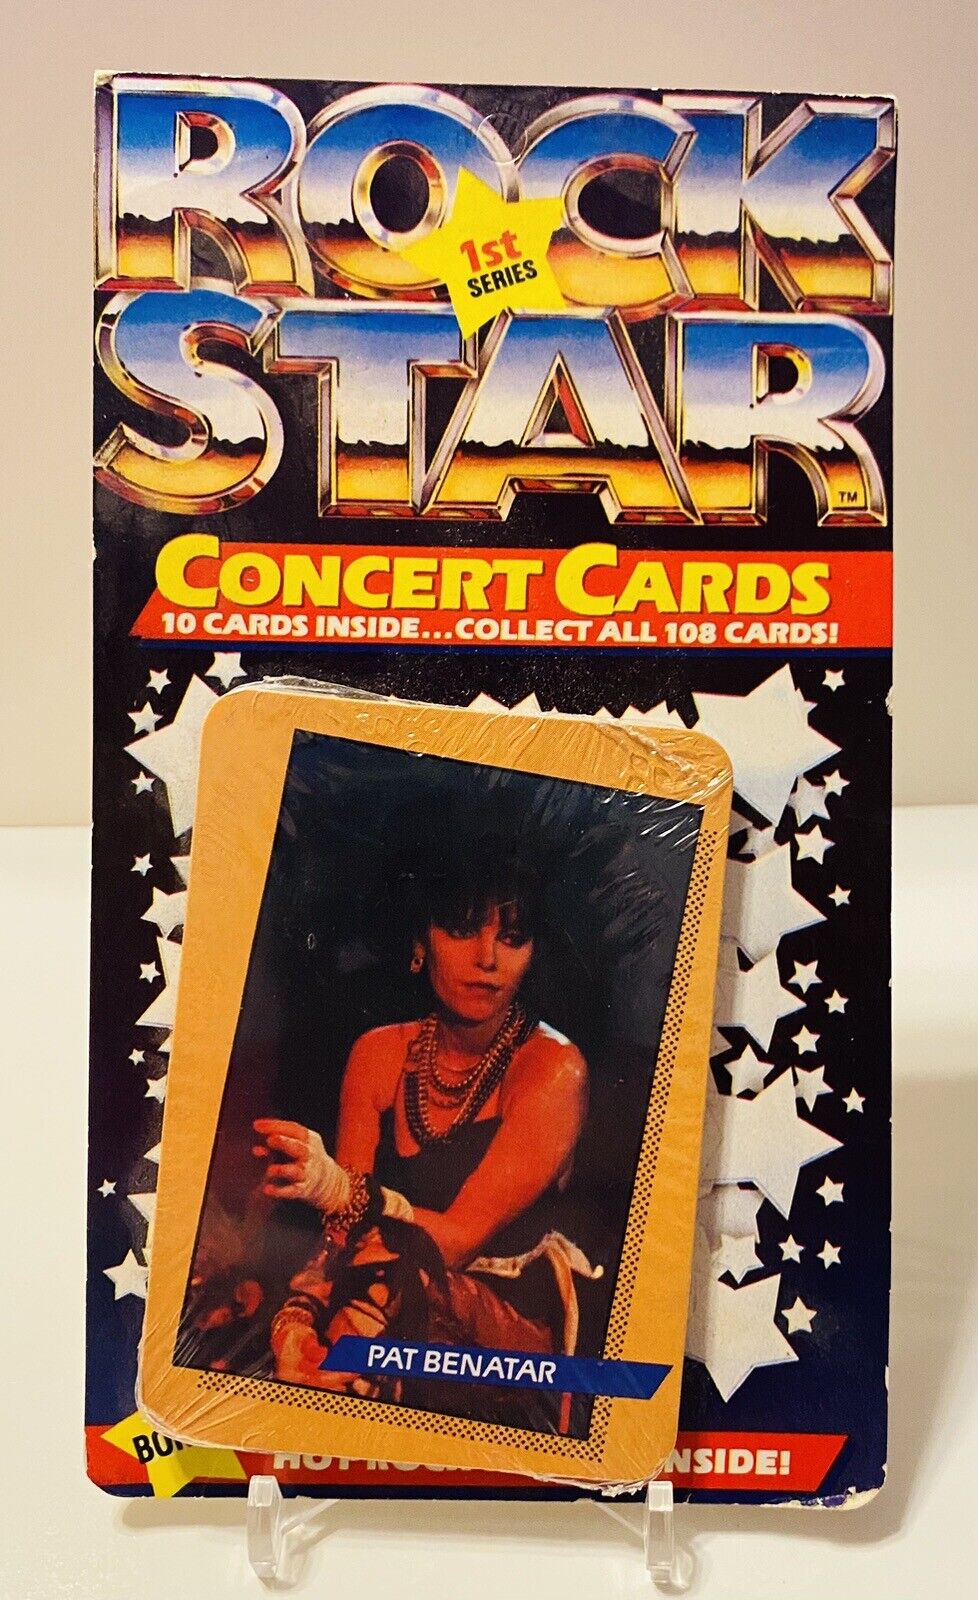 1985 ROCK STAR CONCERT CARD 1ST SERIES SEALED UNOPENED PACK PAT BENATAR ON FRONT